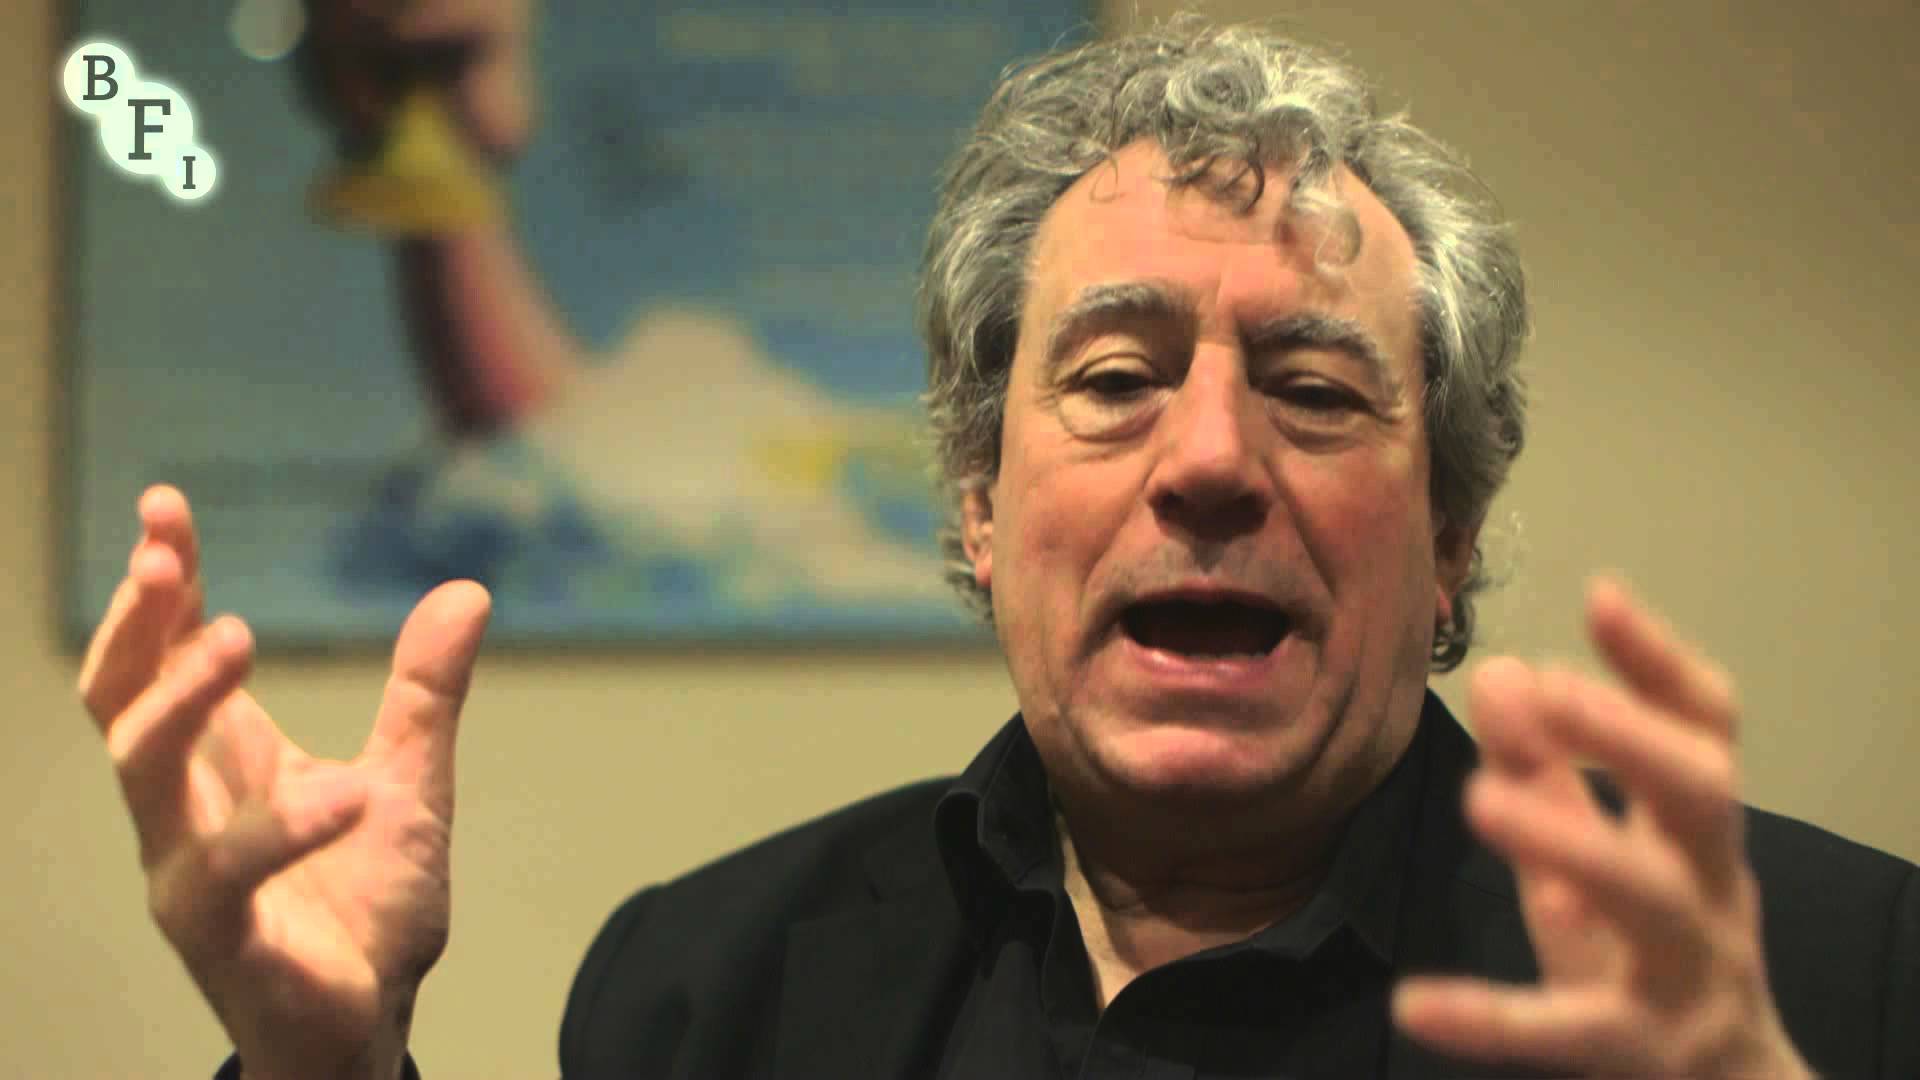 Monty Python star Terry Jones was recently diagnosed with dementia. The 74-year-old is suffering from primary progressive aphasia, which affects his ability to communicate.